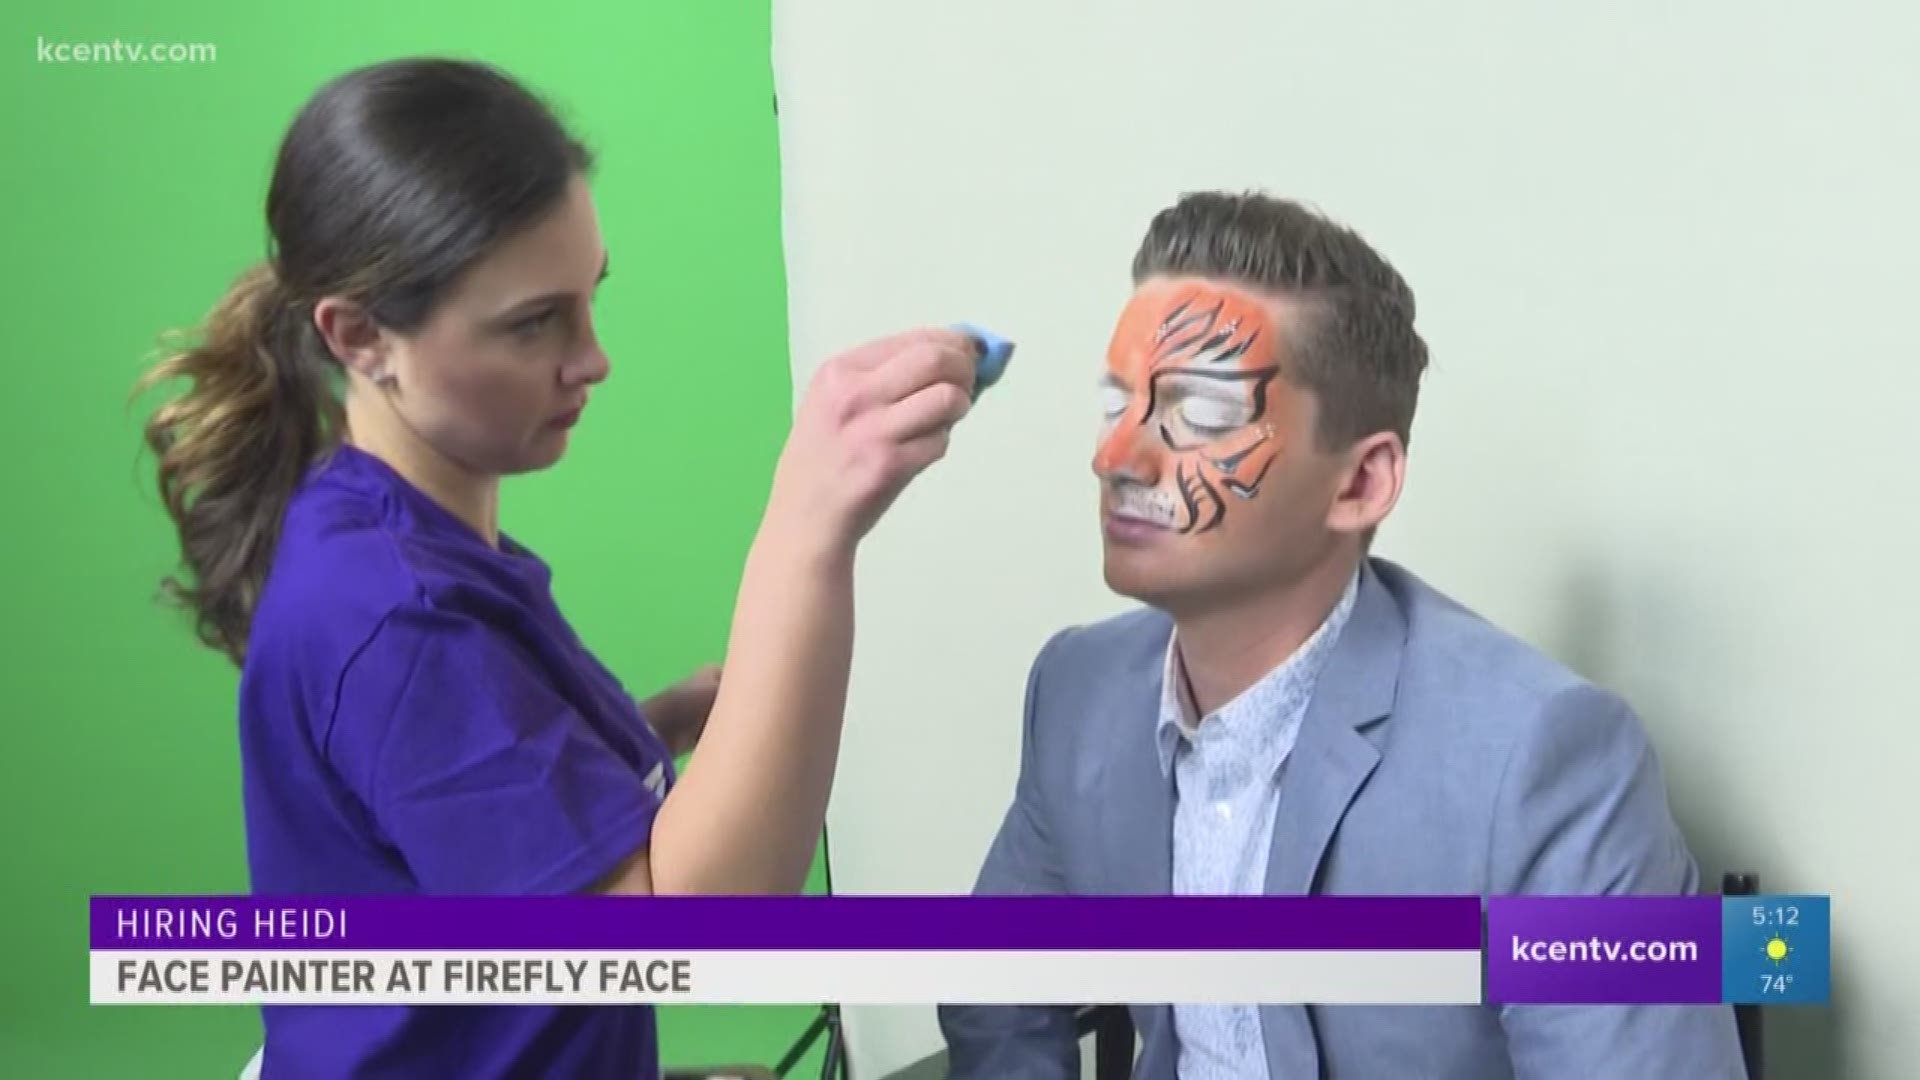 Texas Today anchor Heidi Alagha channeled her inner Picasso for this edition of Hiring Heidi. Her canvas was a familiar face.